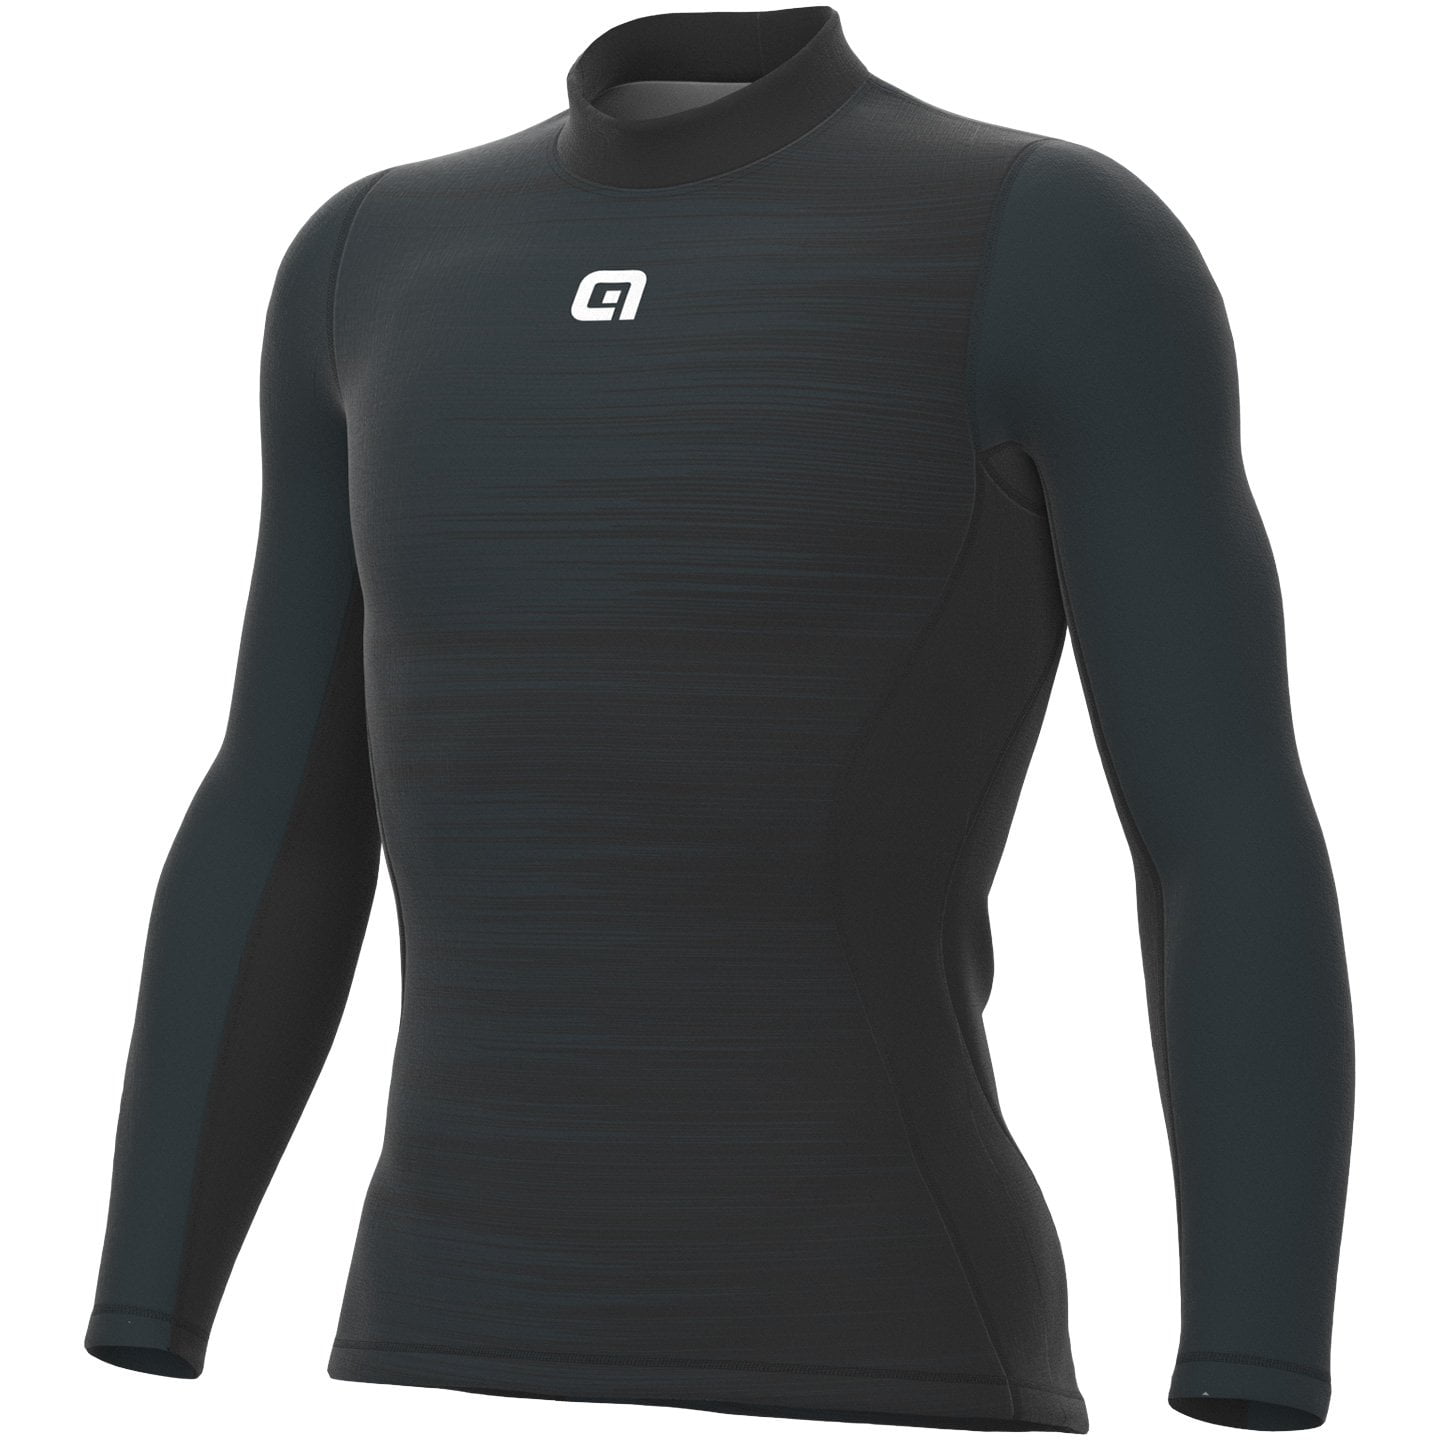 ALE Shade Long Sleeve Cycling Base Layer Base Layer, for men, size XL